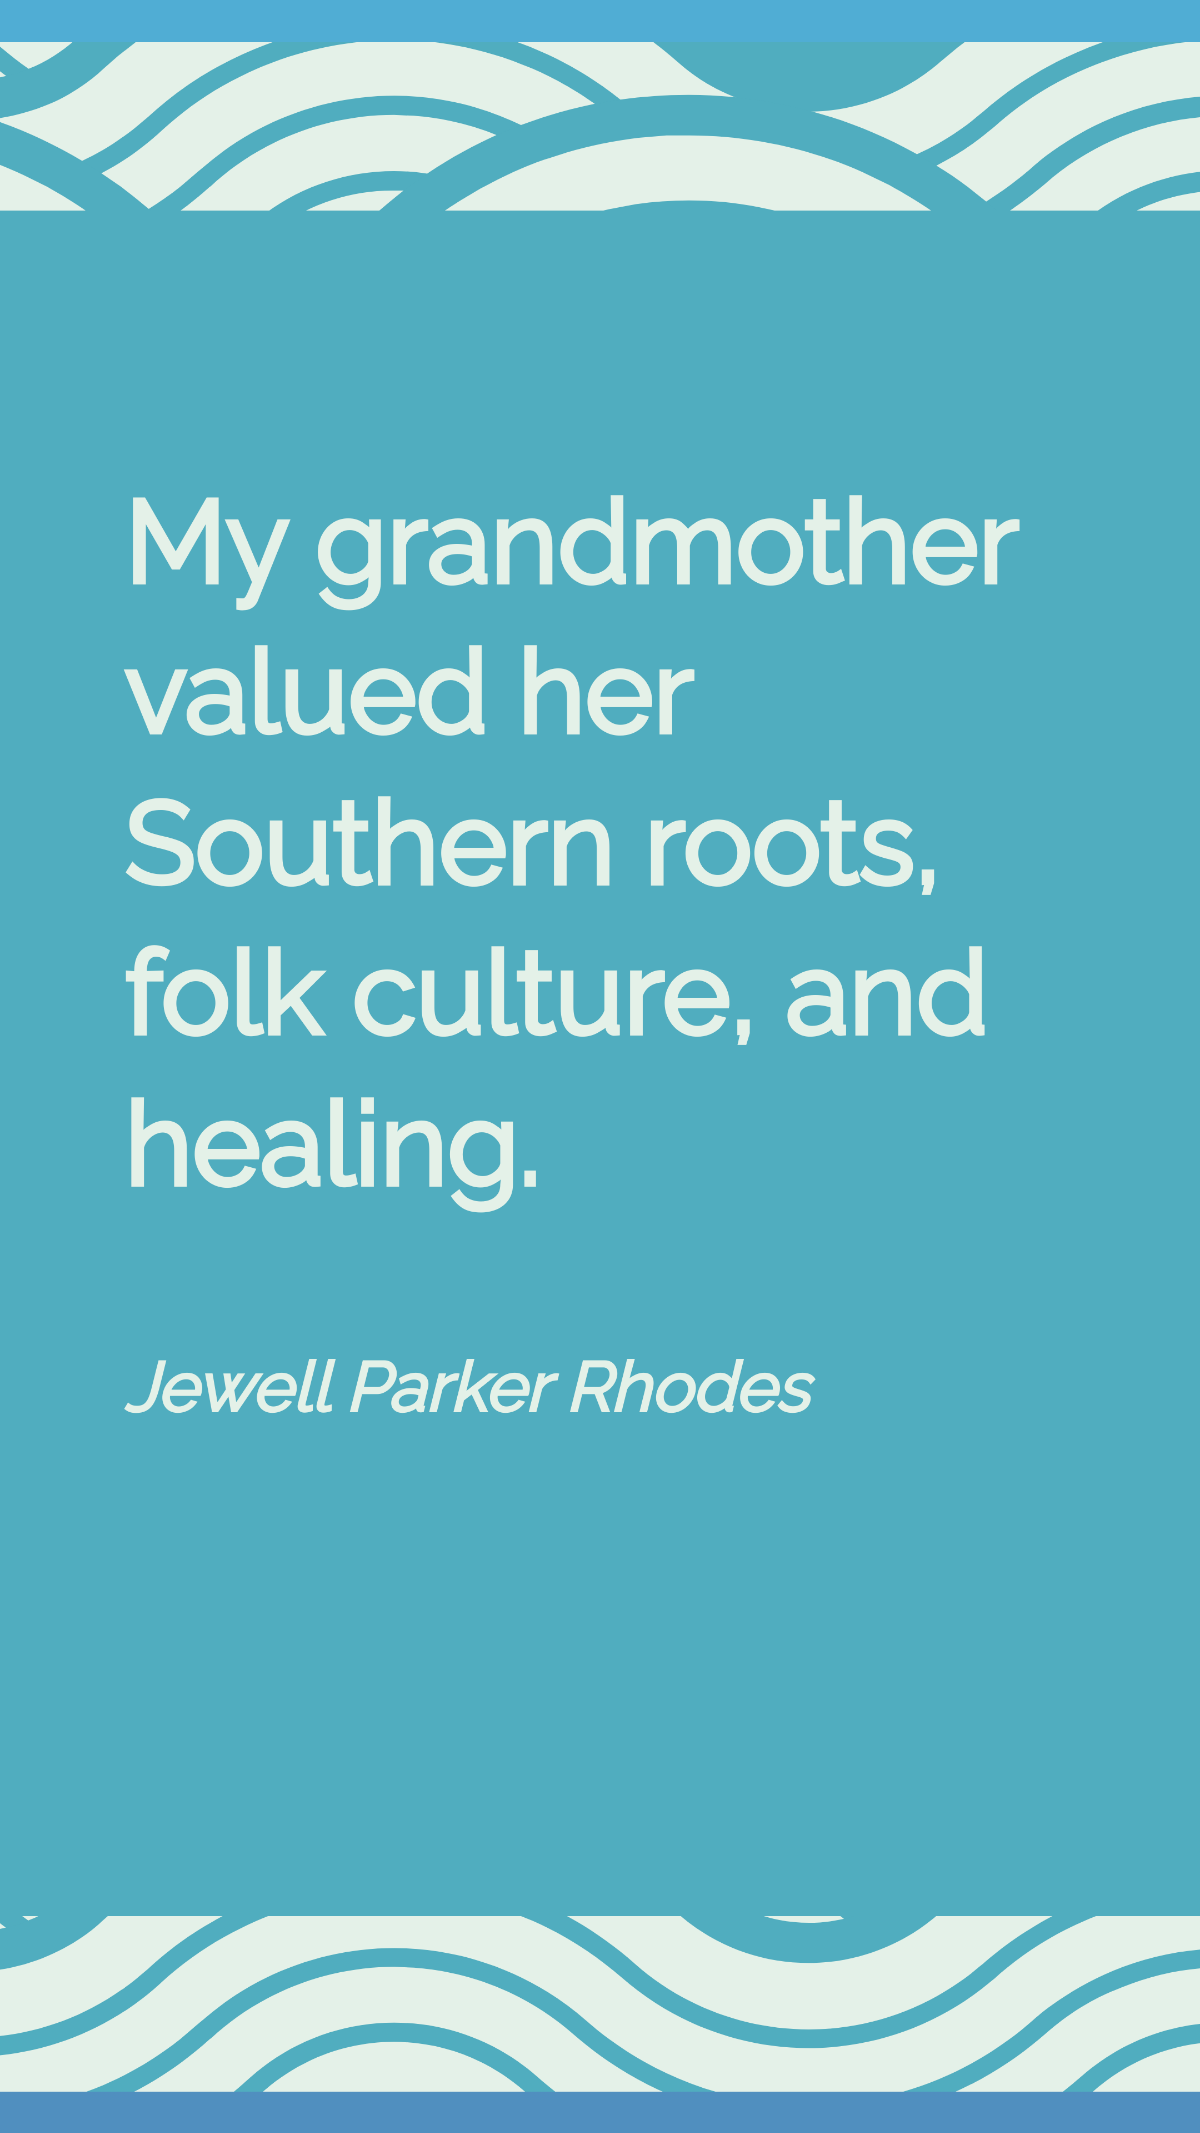 Jewell Parker Rhodes - My grandmother valued her Southern roots, folk culture, and healing.